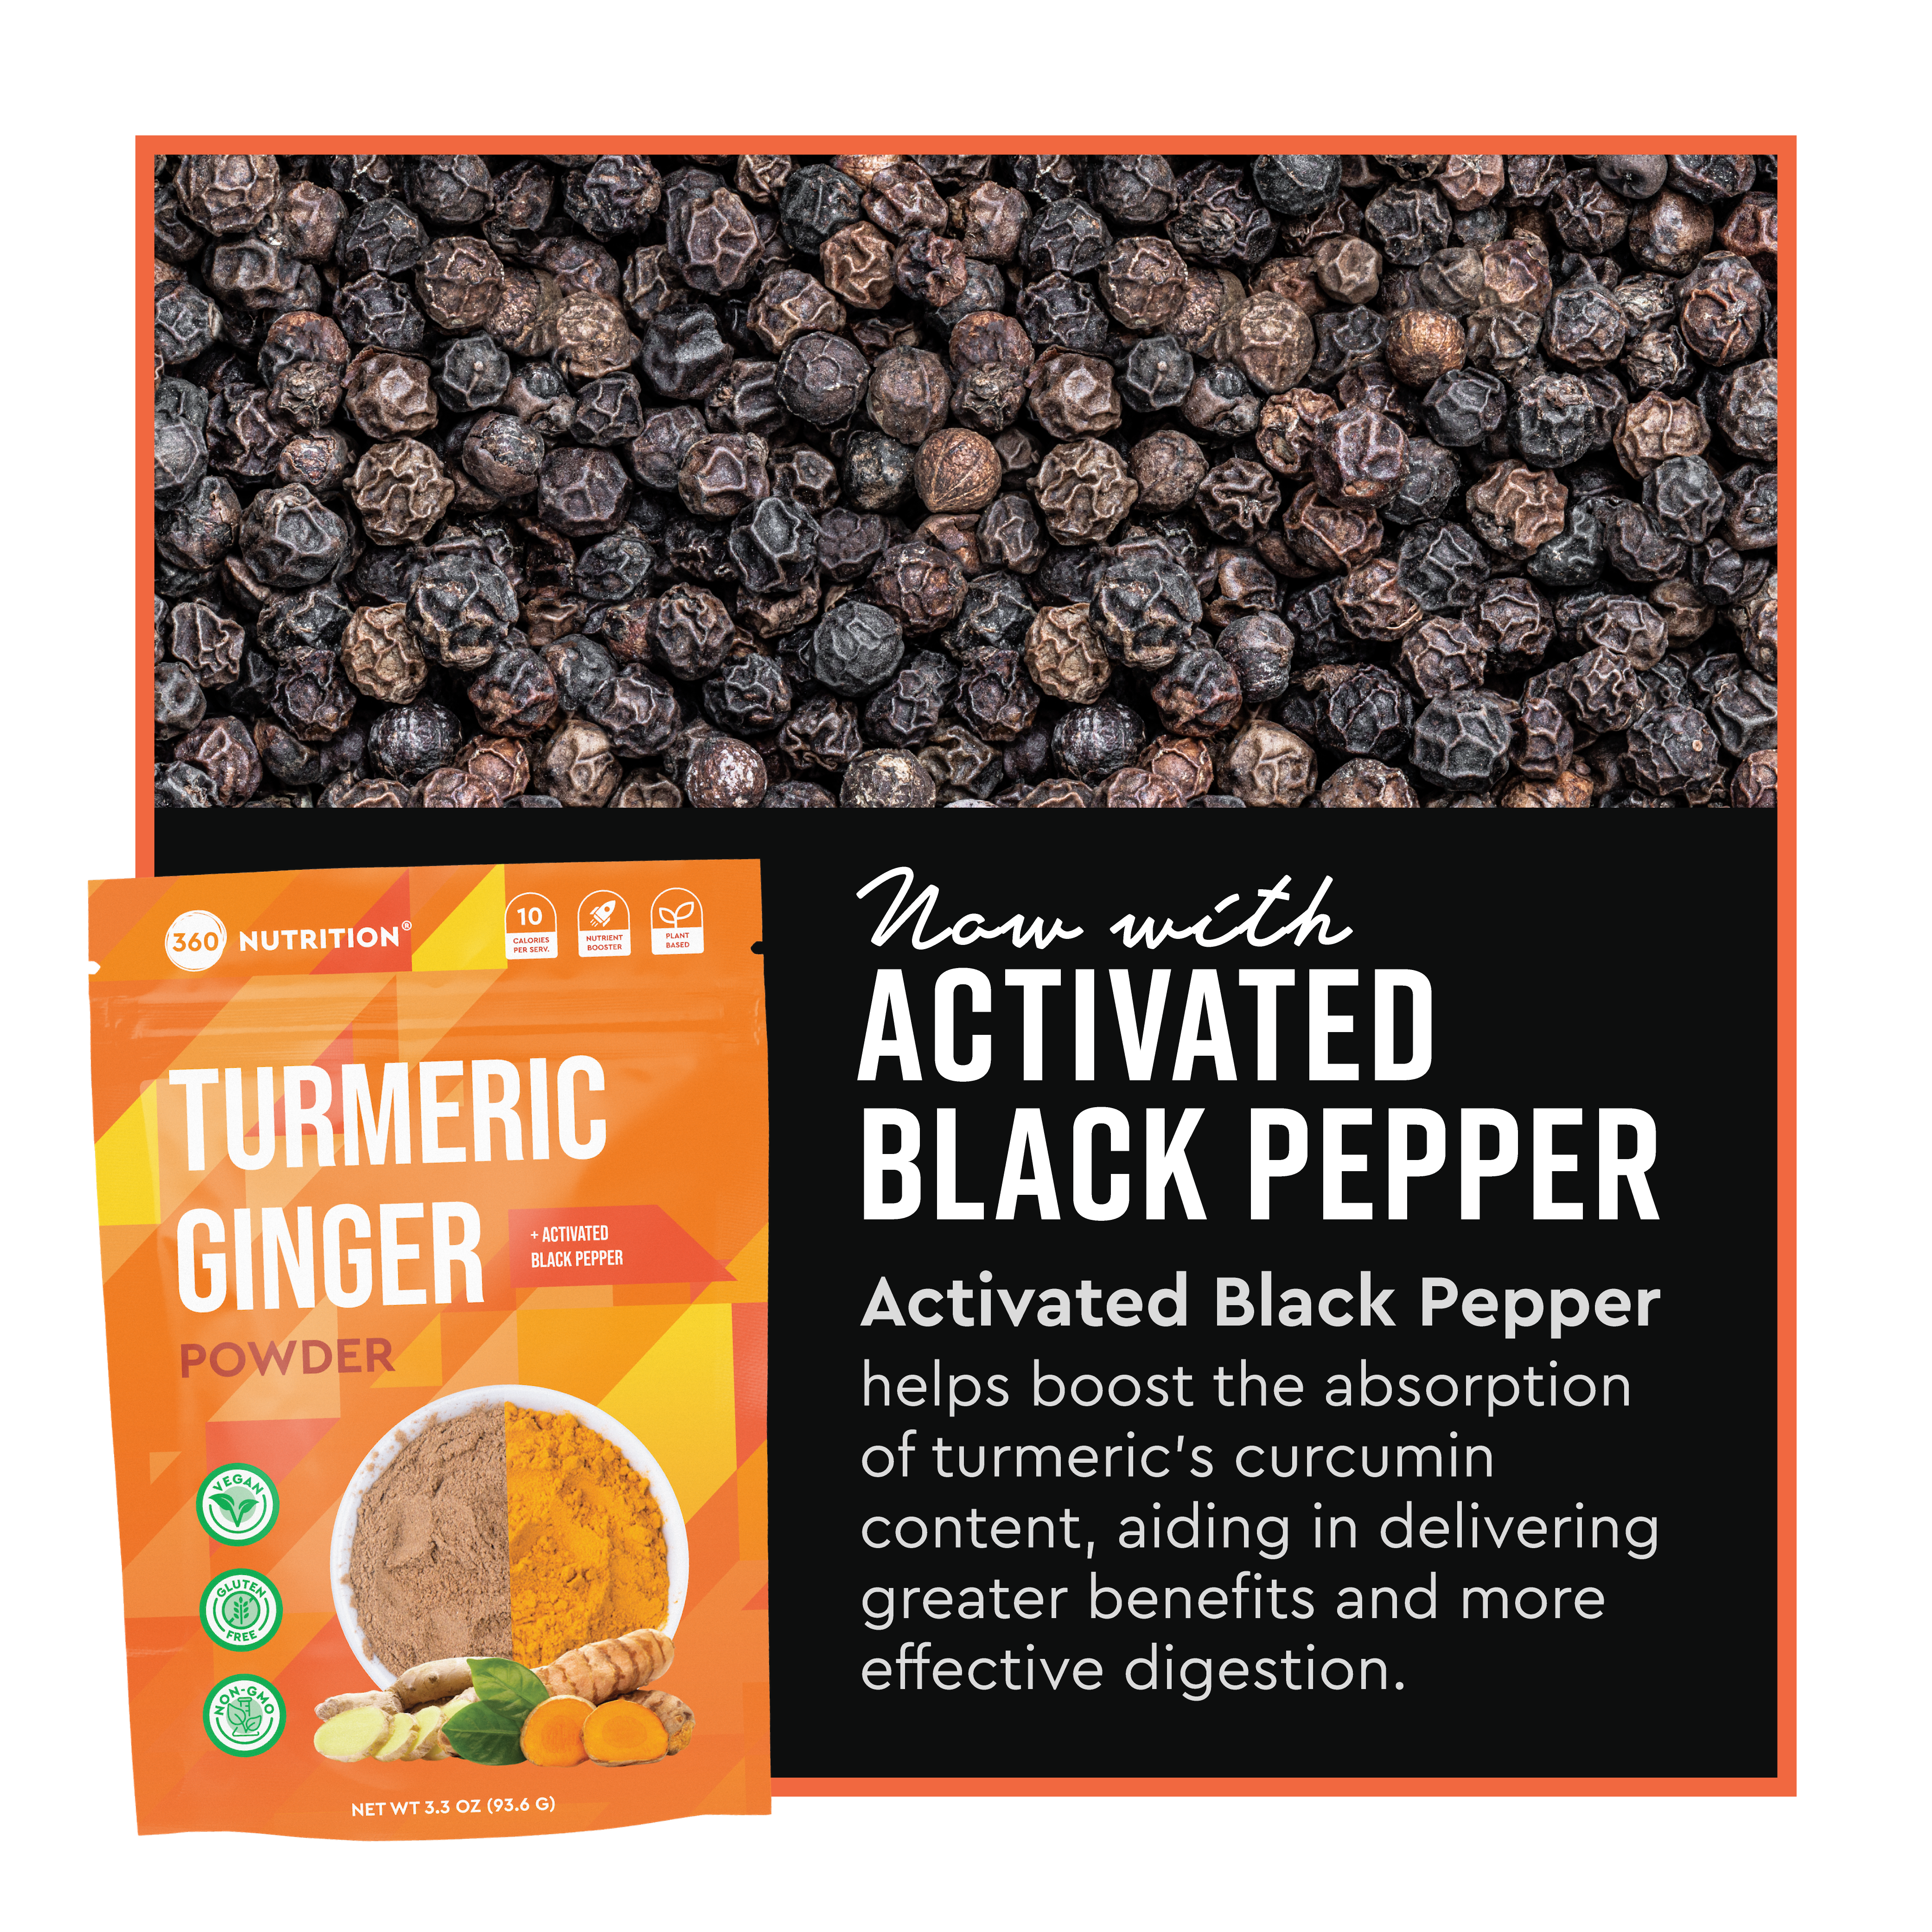 Turmeric Ginger Superfood Powder with Activated Black Pepper